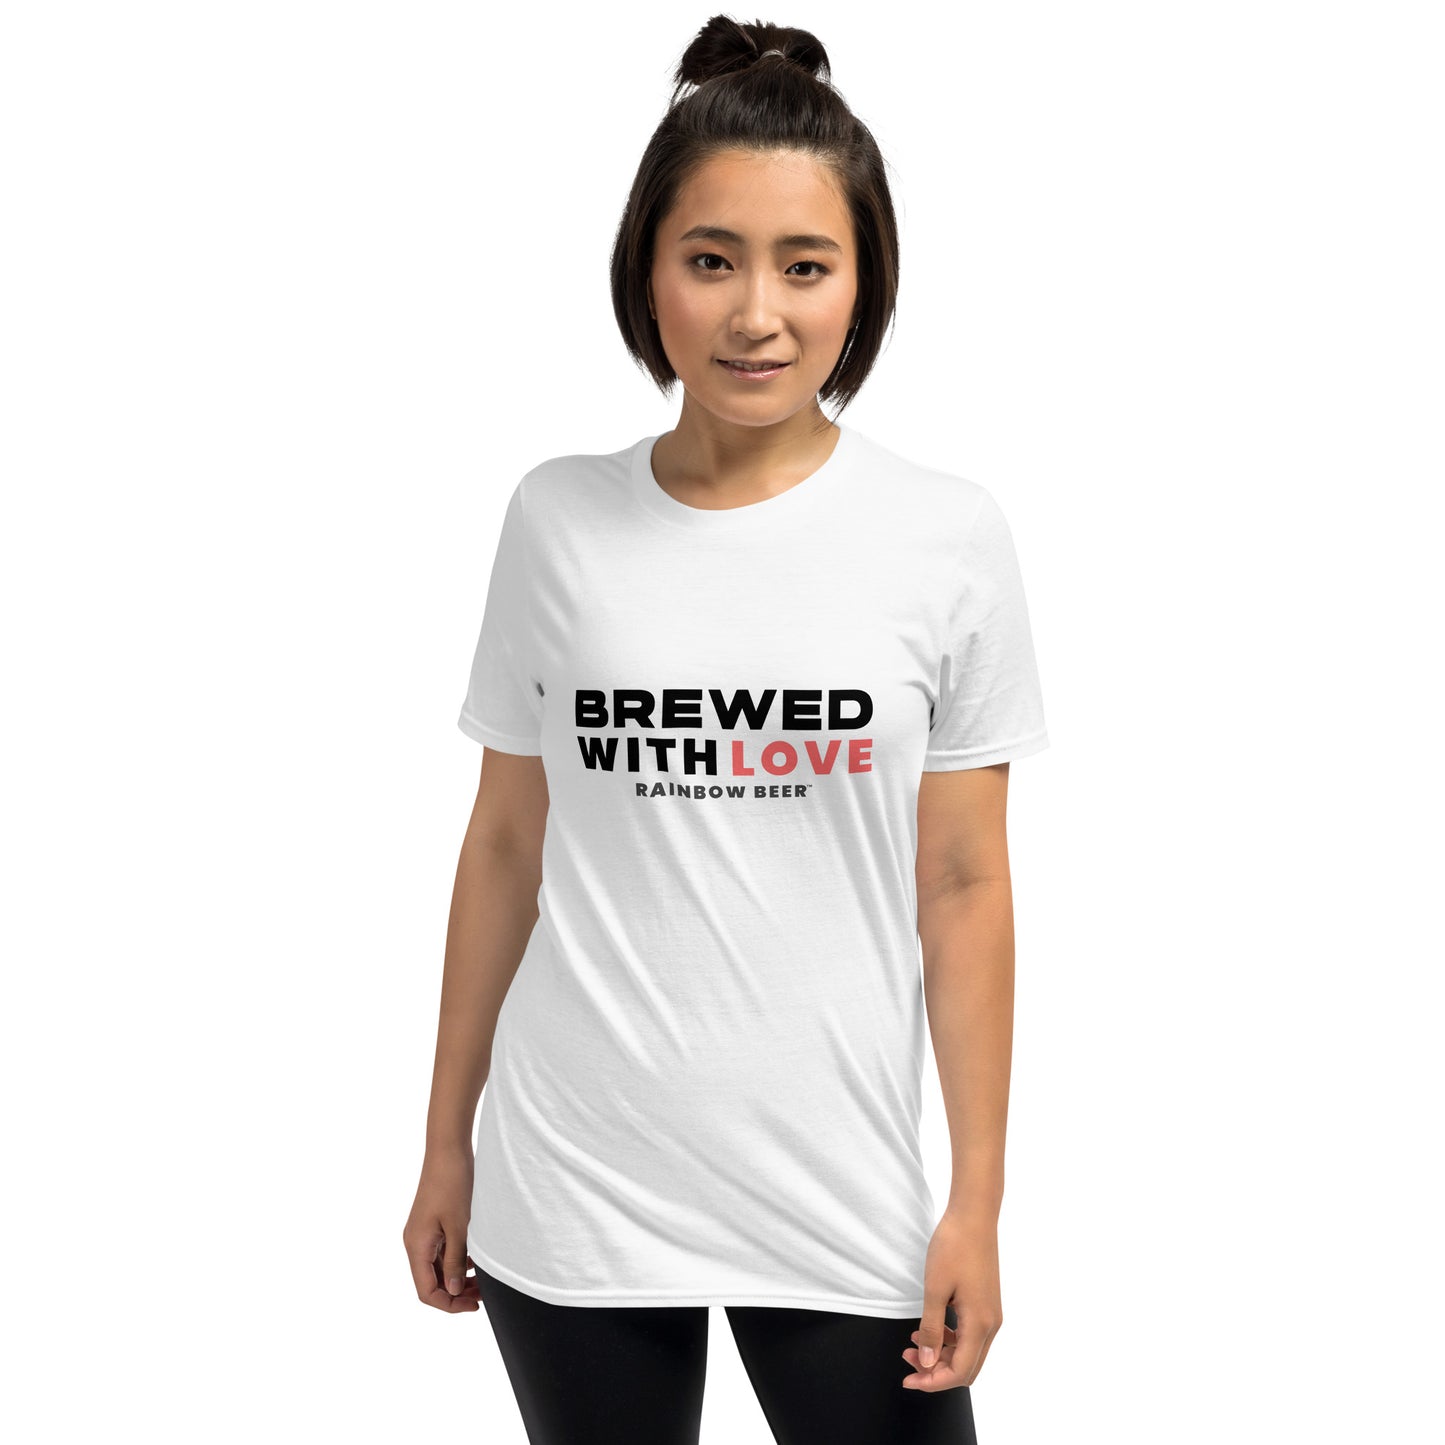 BREWED WITH LOVE SHIRT